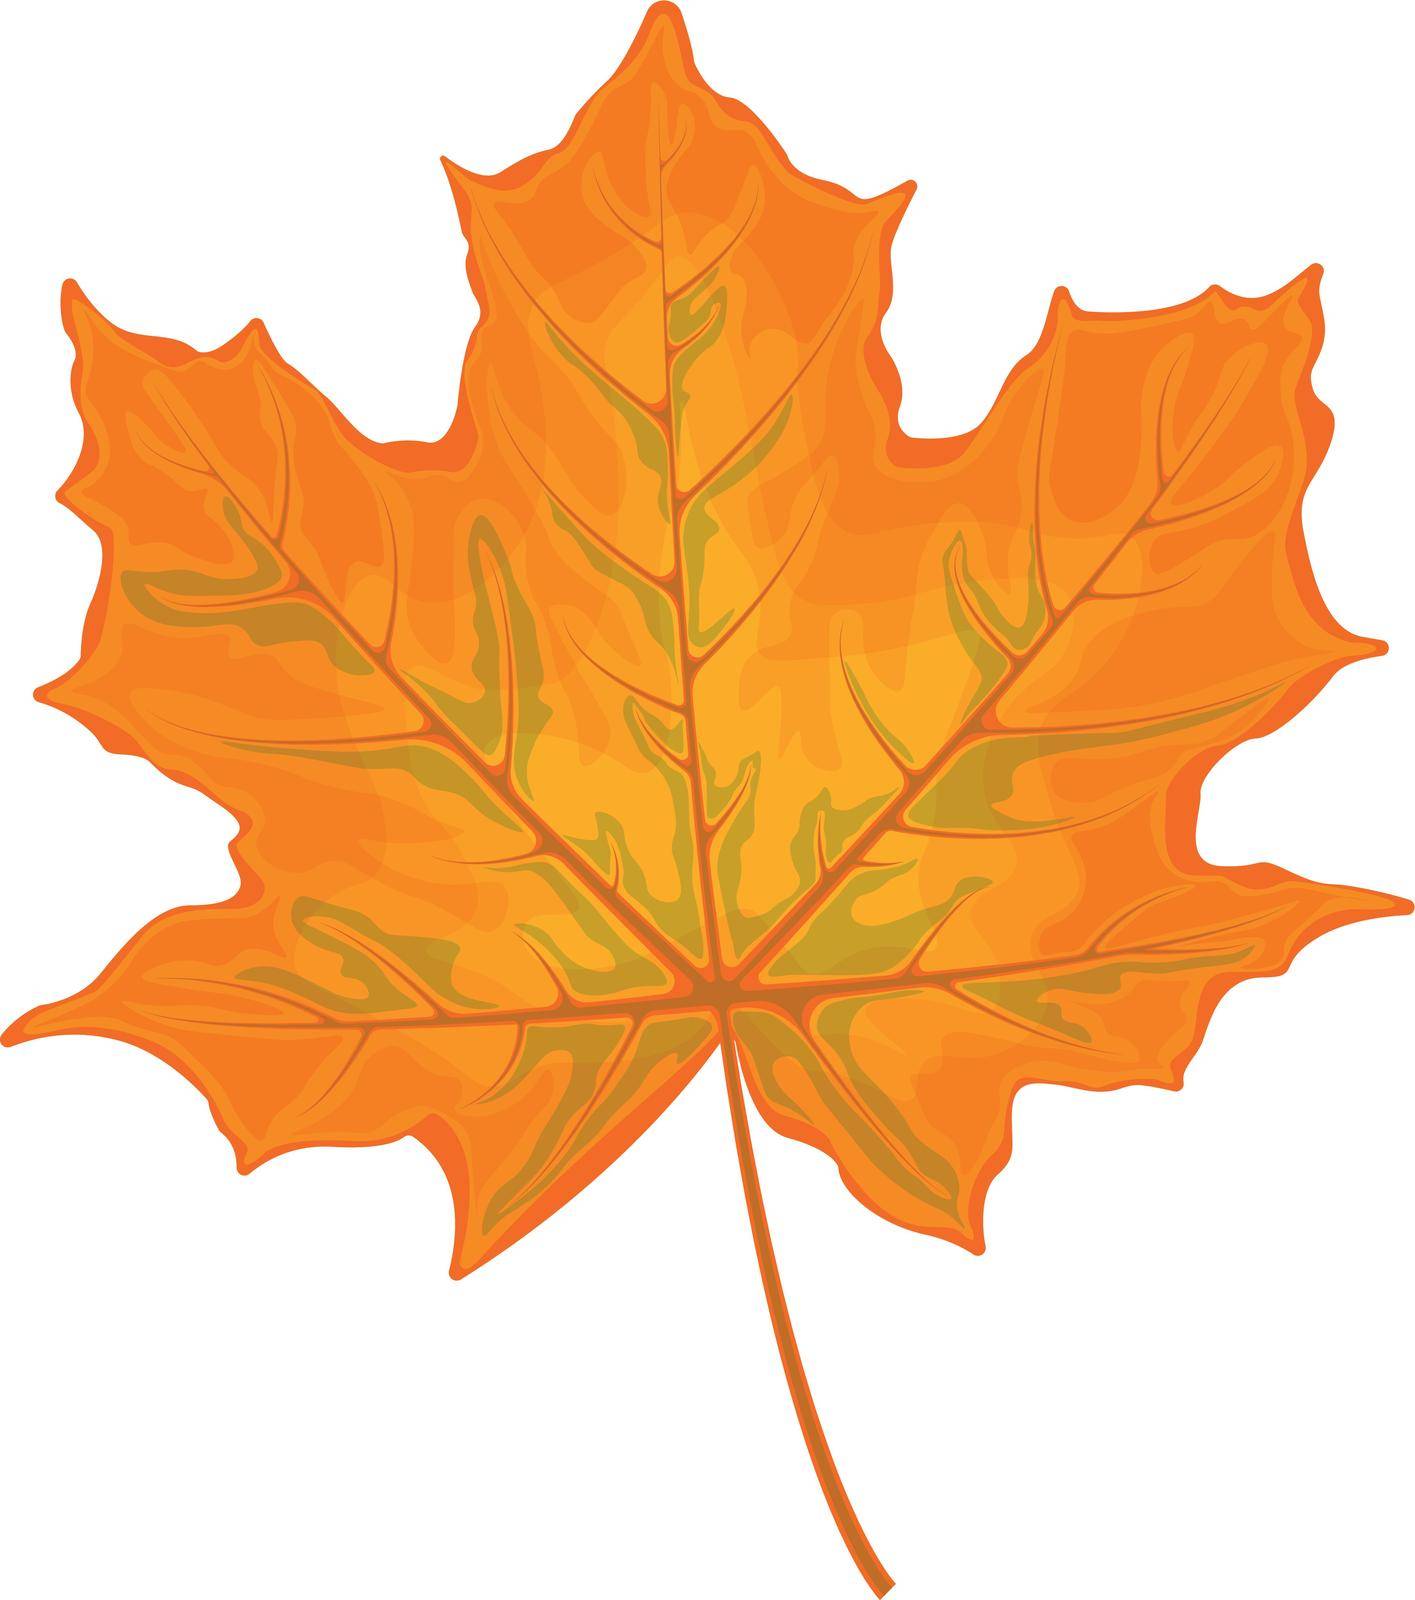 Maple leaf. Yellow maple leaf. A dry autumn leaf of a maple tree. Vector illustration isolated on a white background.